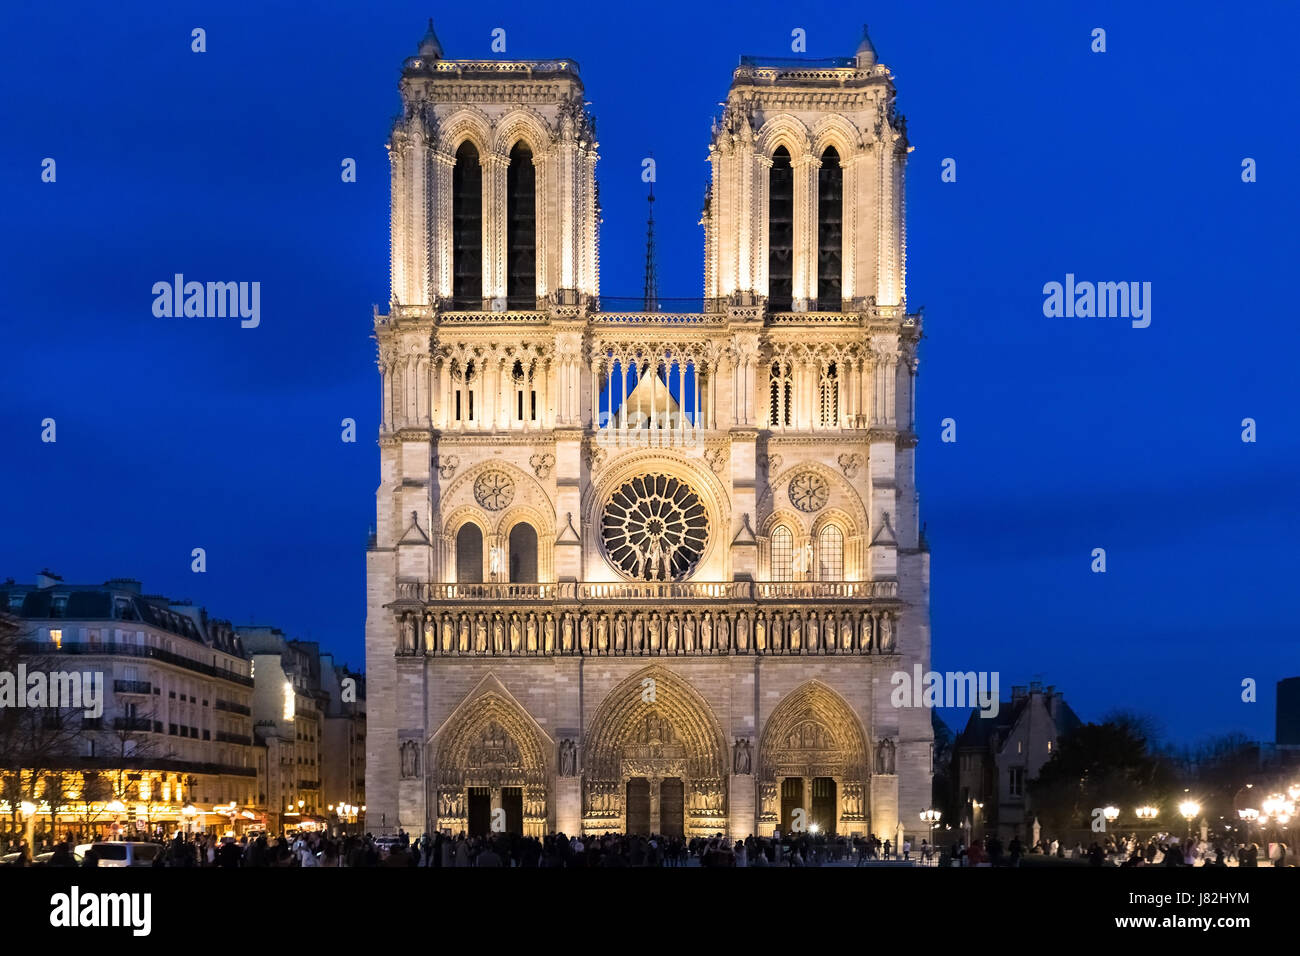 Main facade of Notre-Dame de Paris Cathedral at dusk with illuminations and blue sky, famous landmark of France, perspective correction Stock Photo